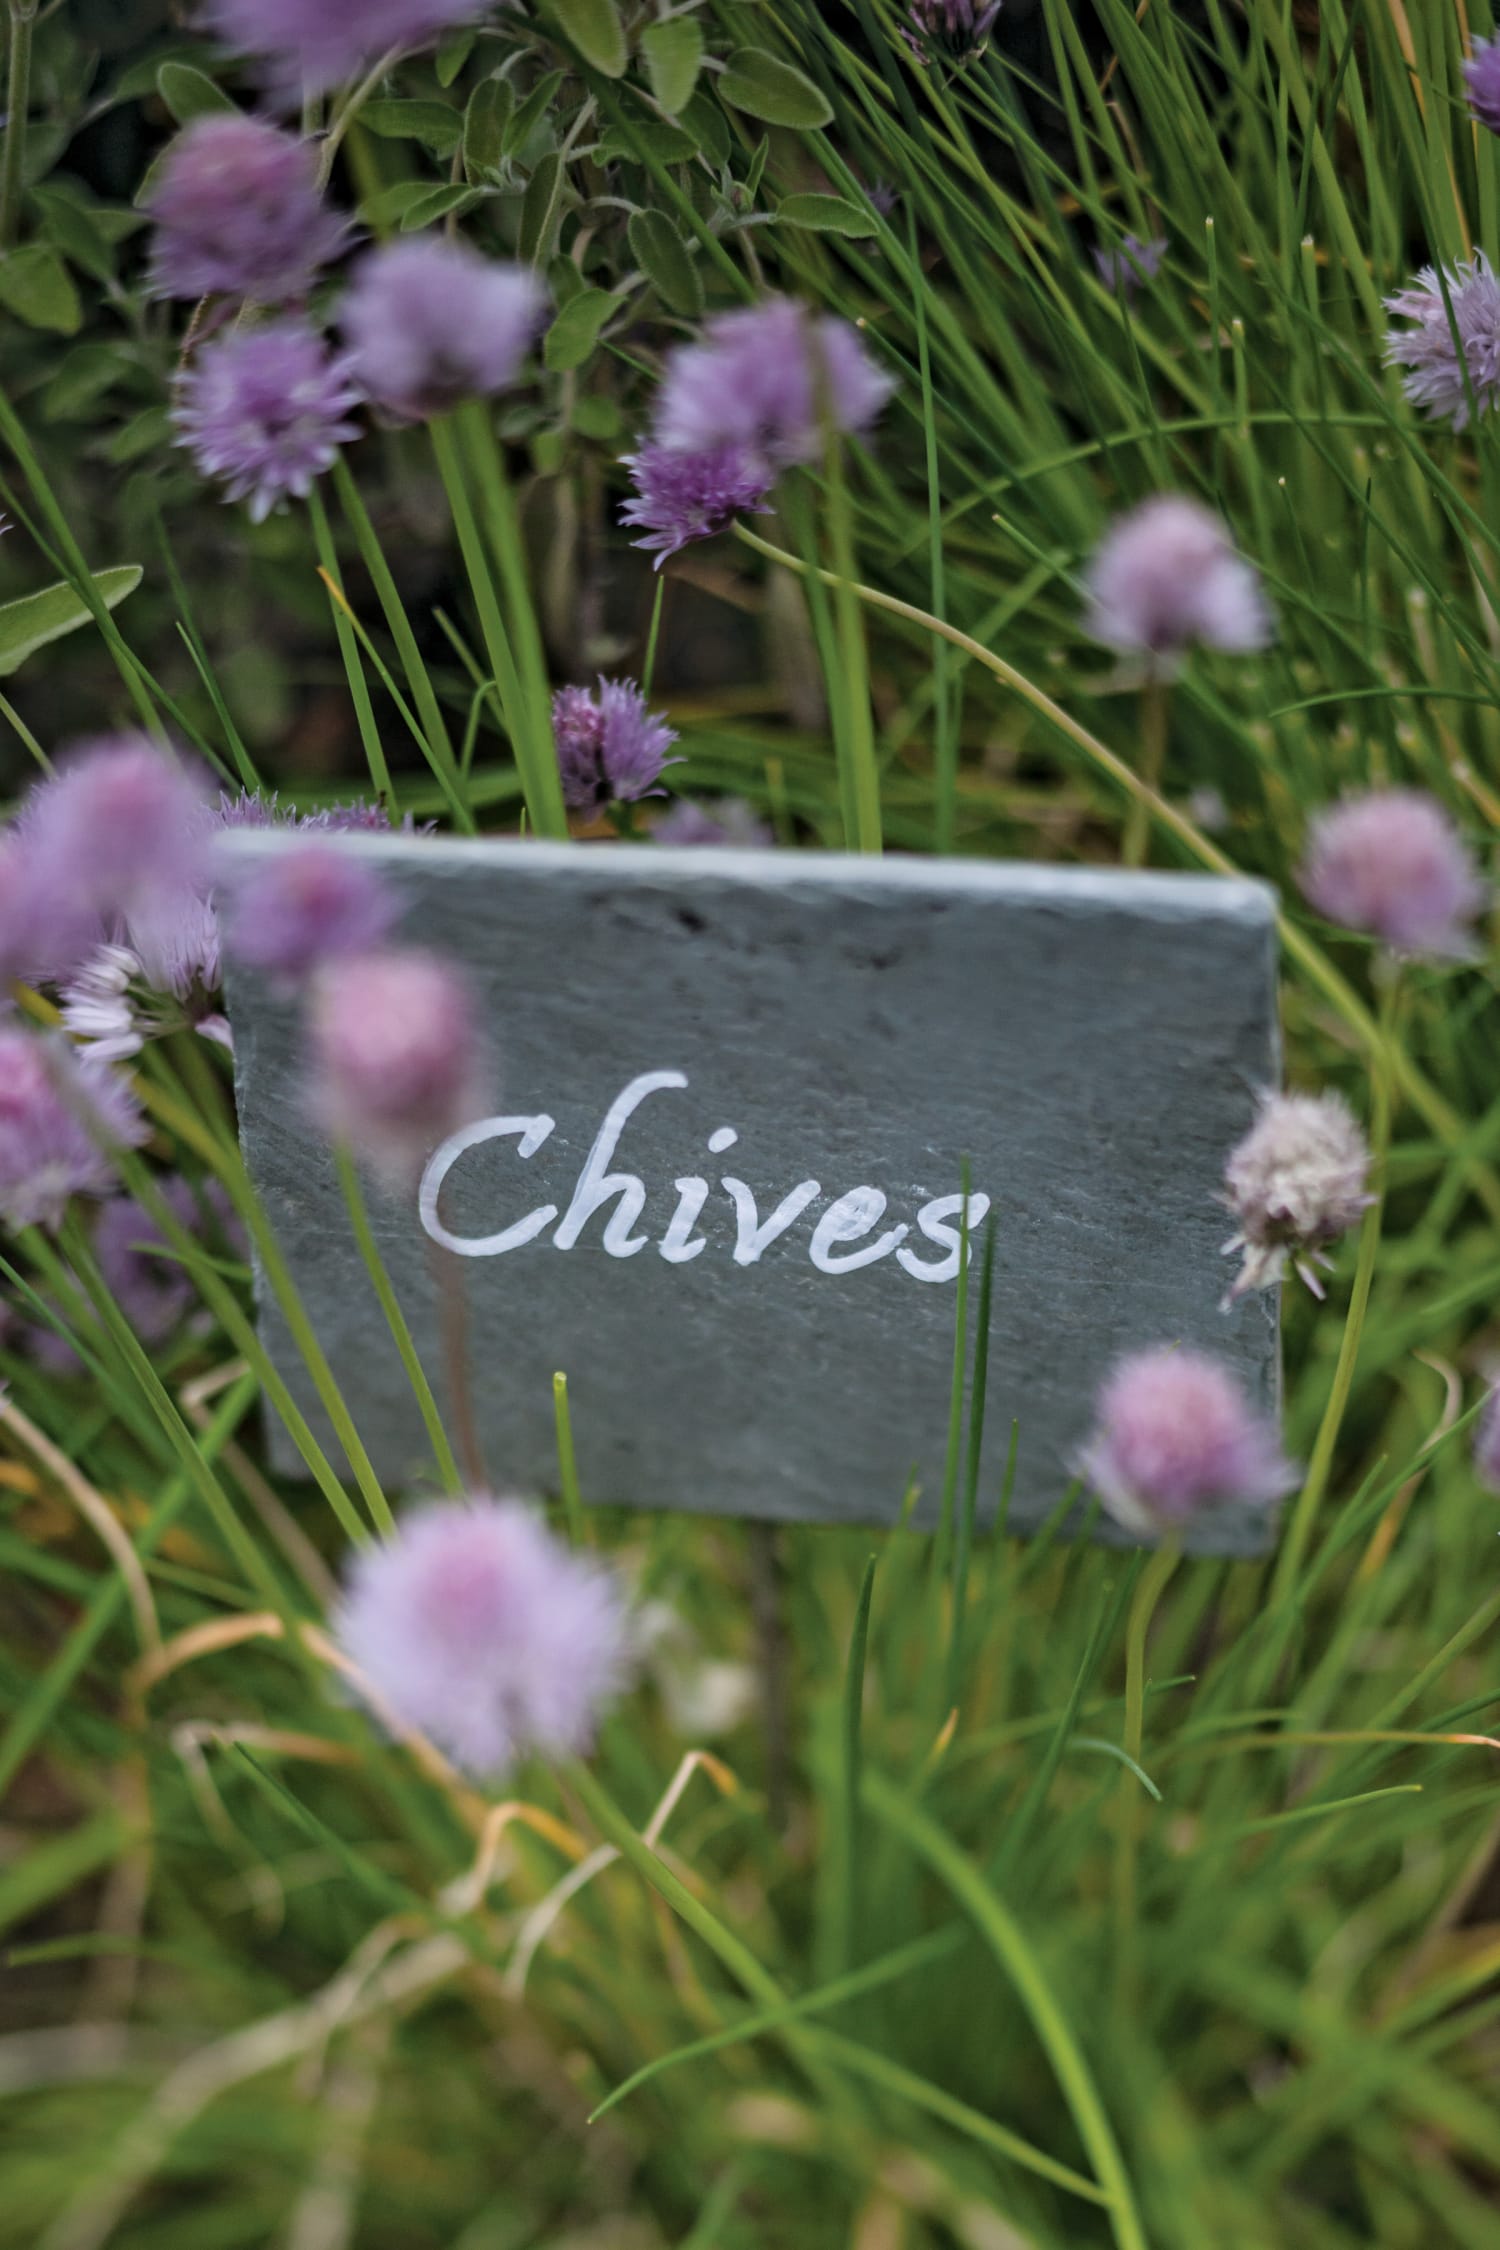 A sign for Chives in the White House Garden